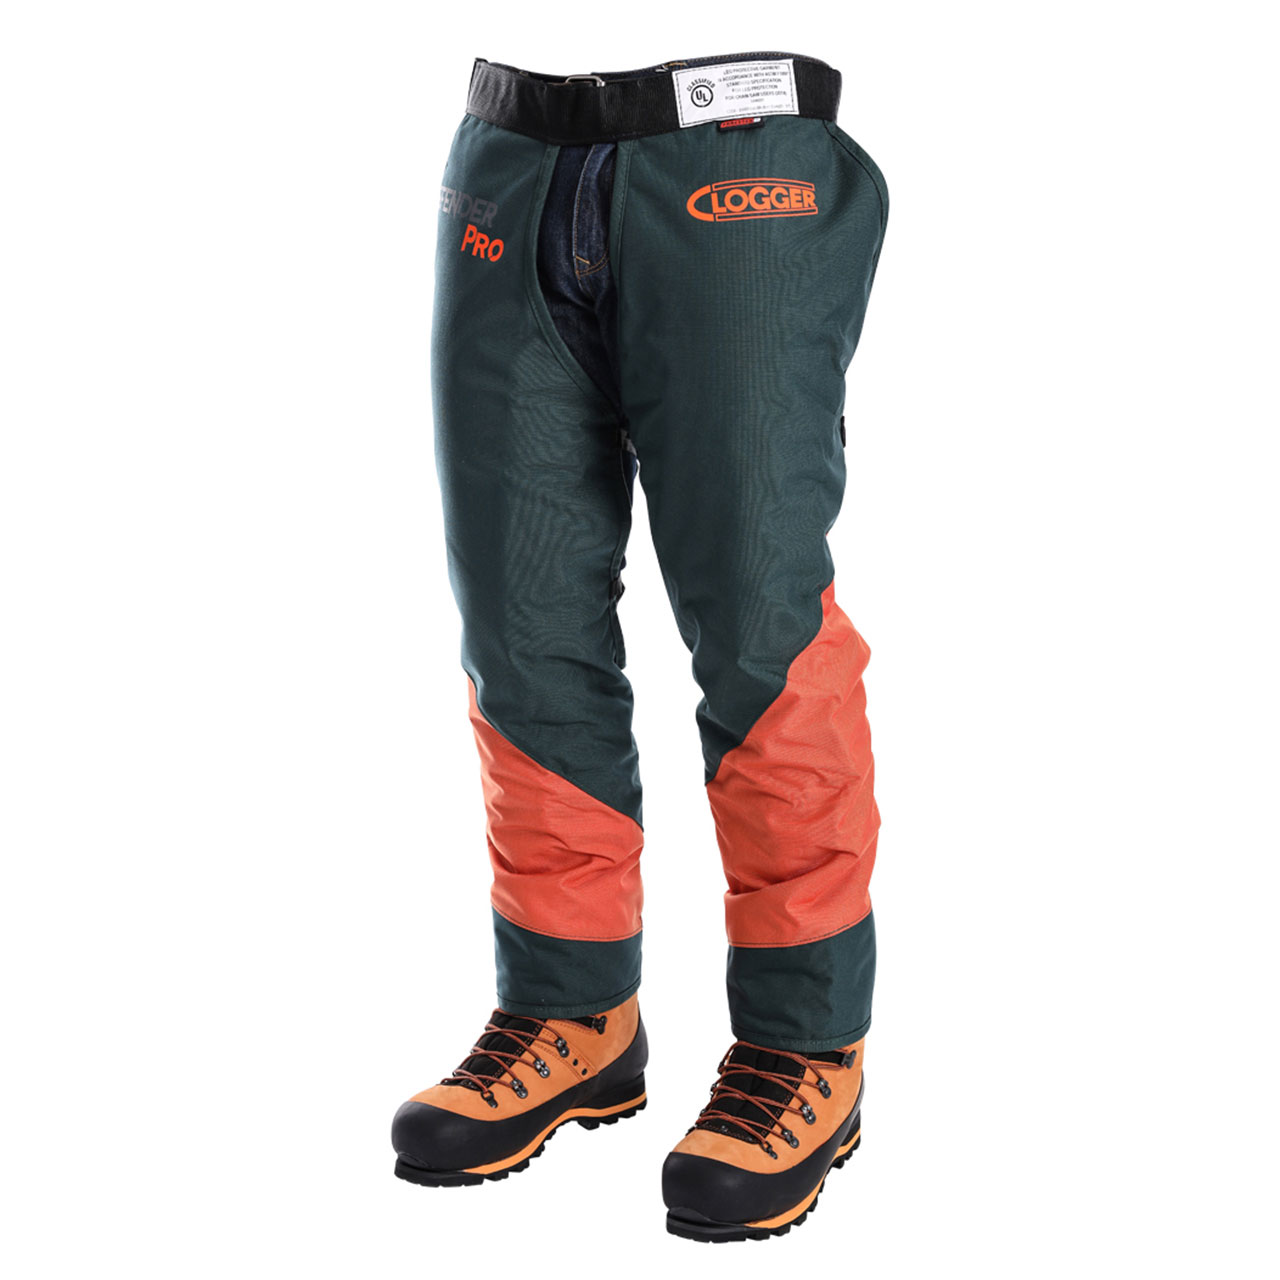 Clogger Defender PRO Chainsaw Chaps